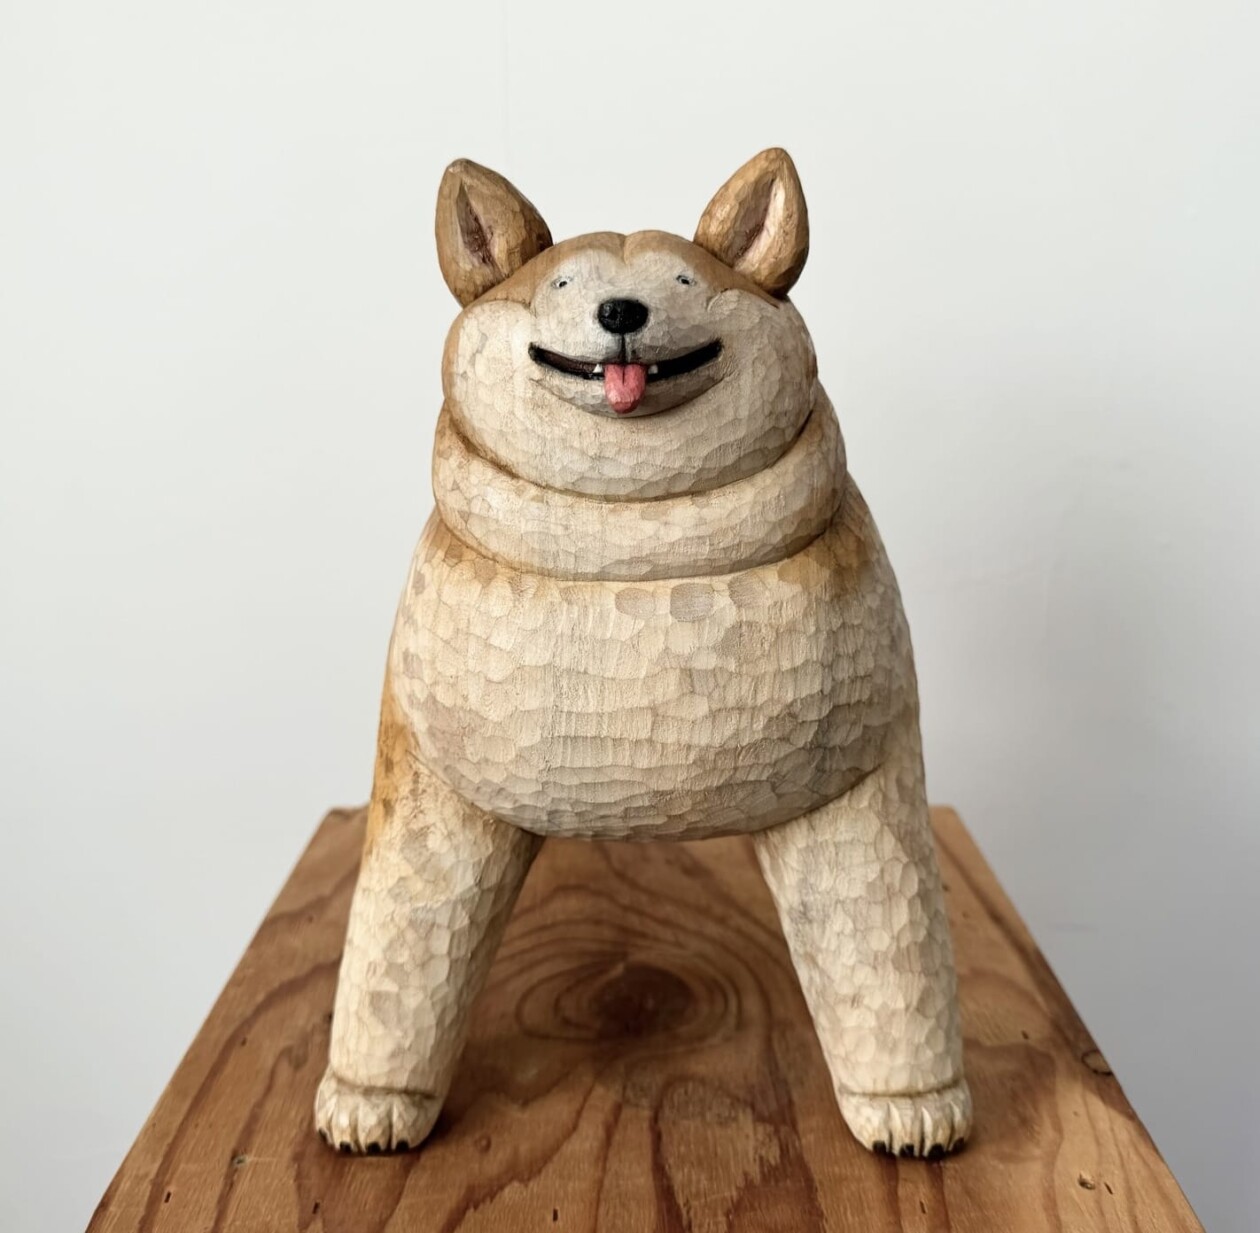 Misato Sano's Wooden Sculptures Bring Canine Companions To Life (8)